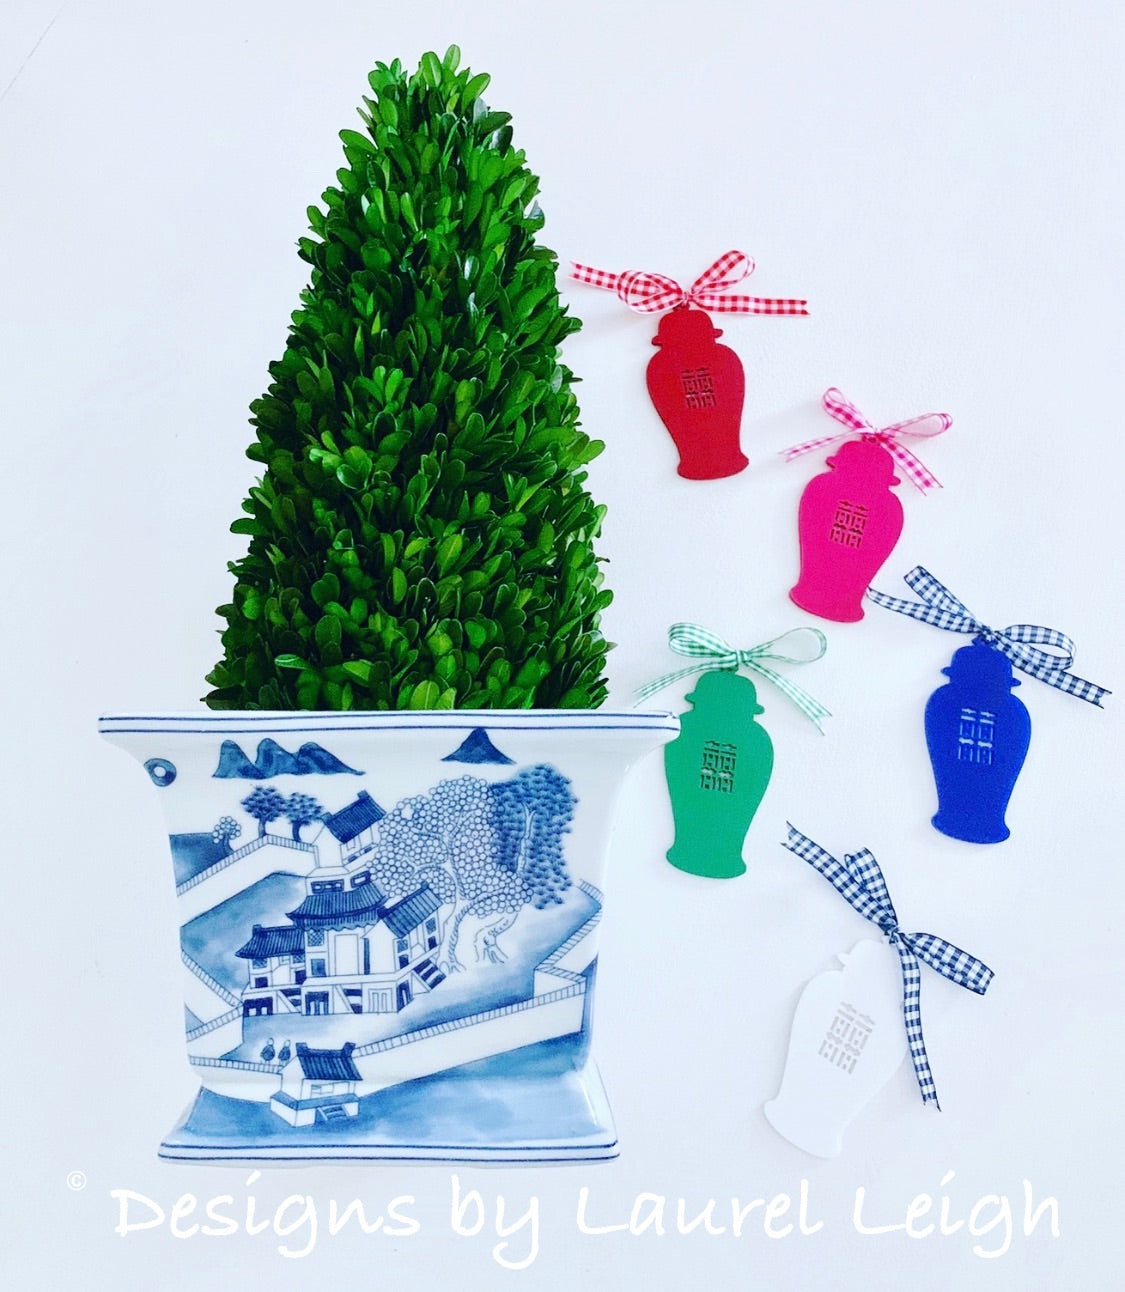 Chinoiserie Chic: A Chinoiserie Christmas with Southern Style